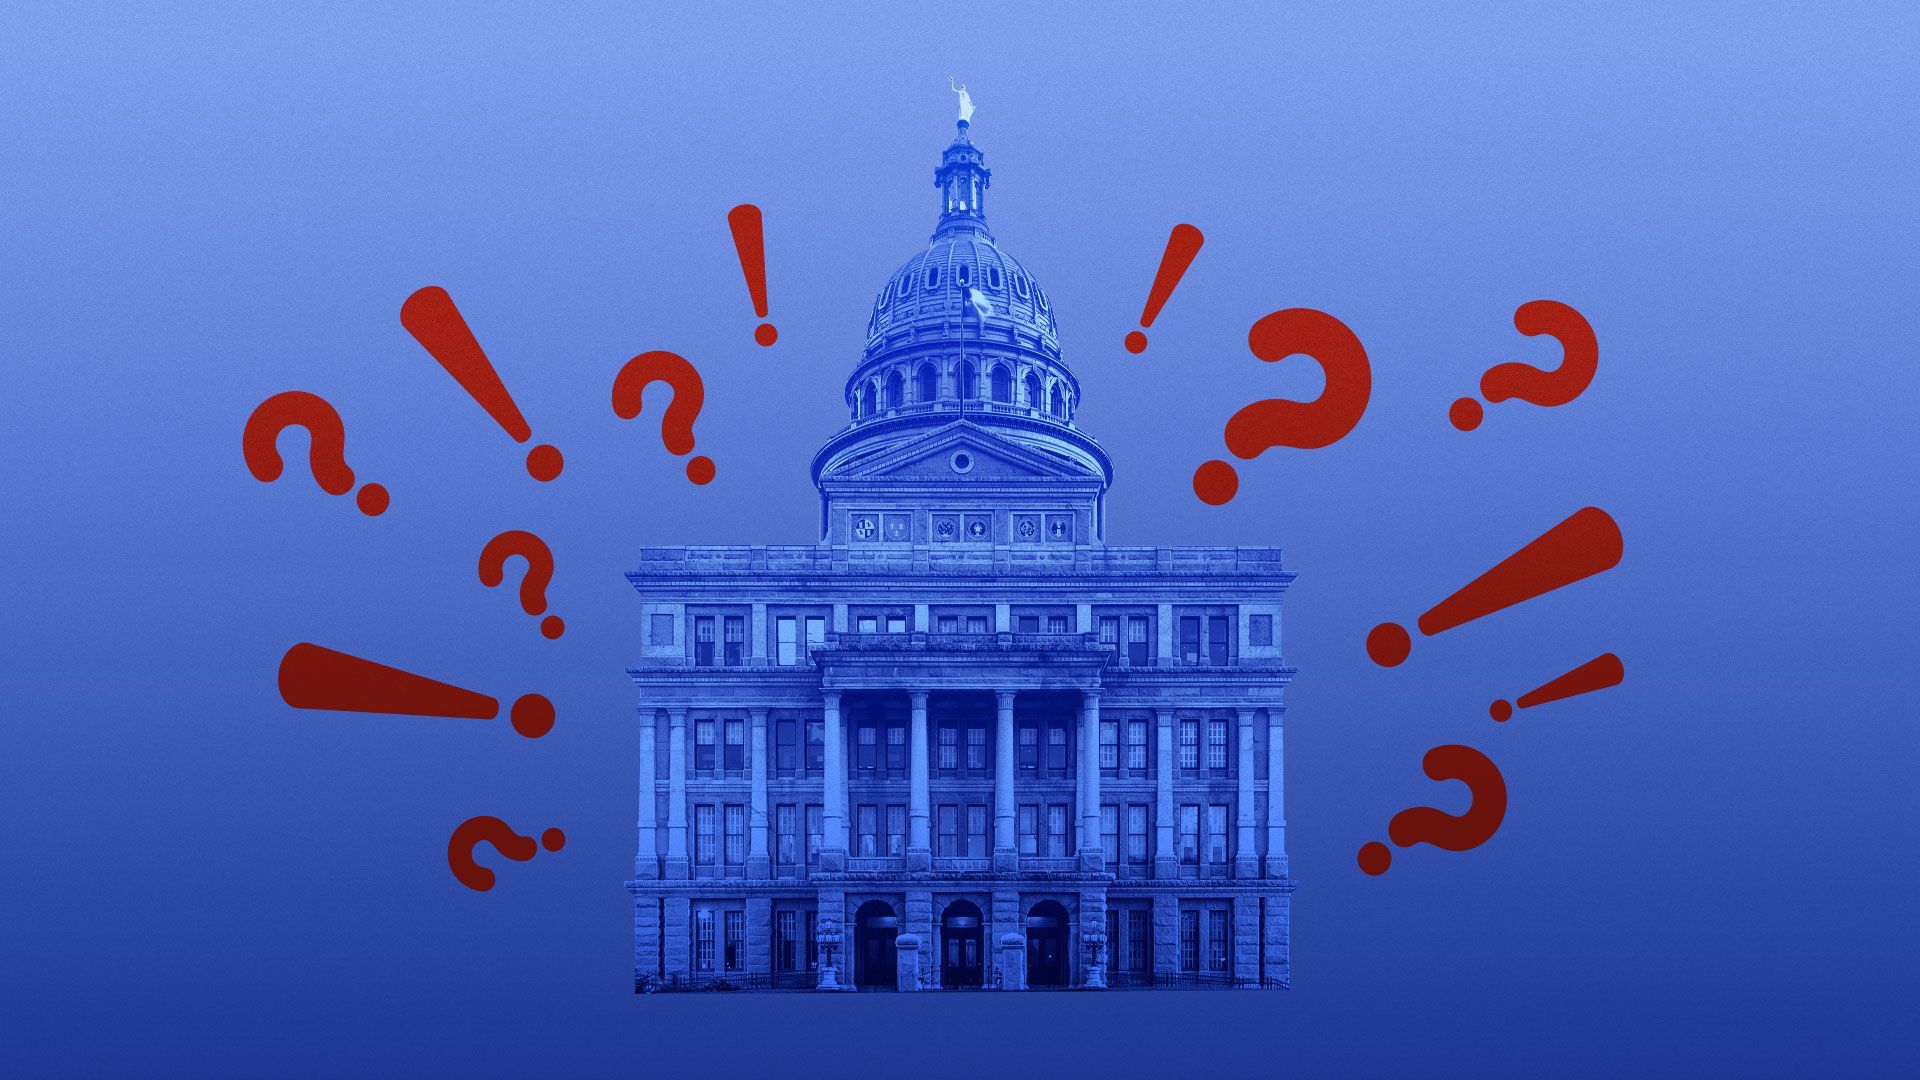 Illustration of statehouse with question marks and exclamation points around it